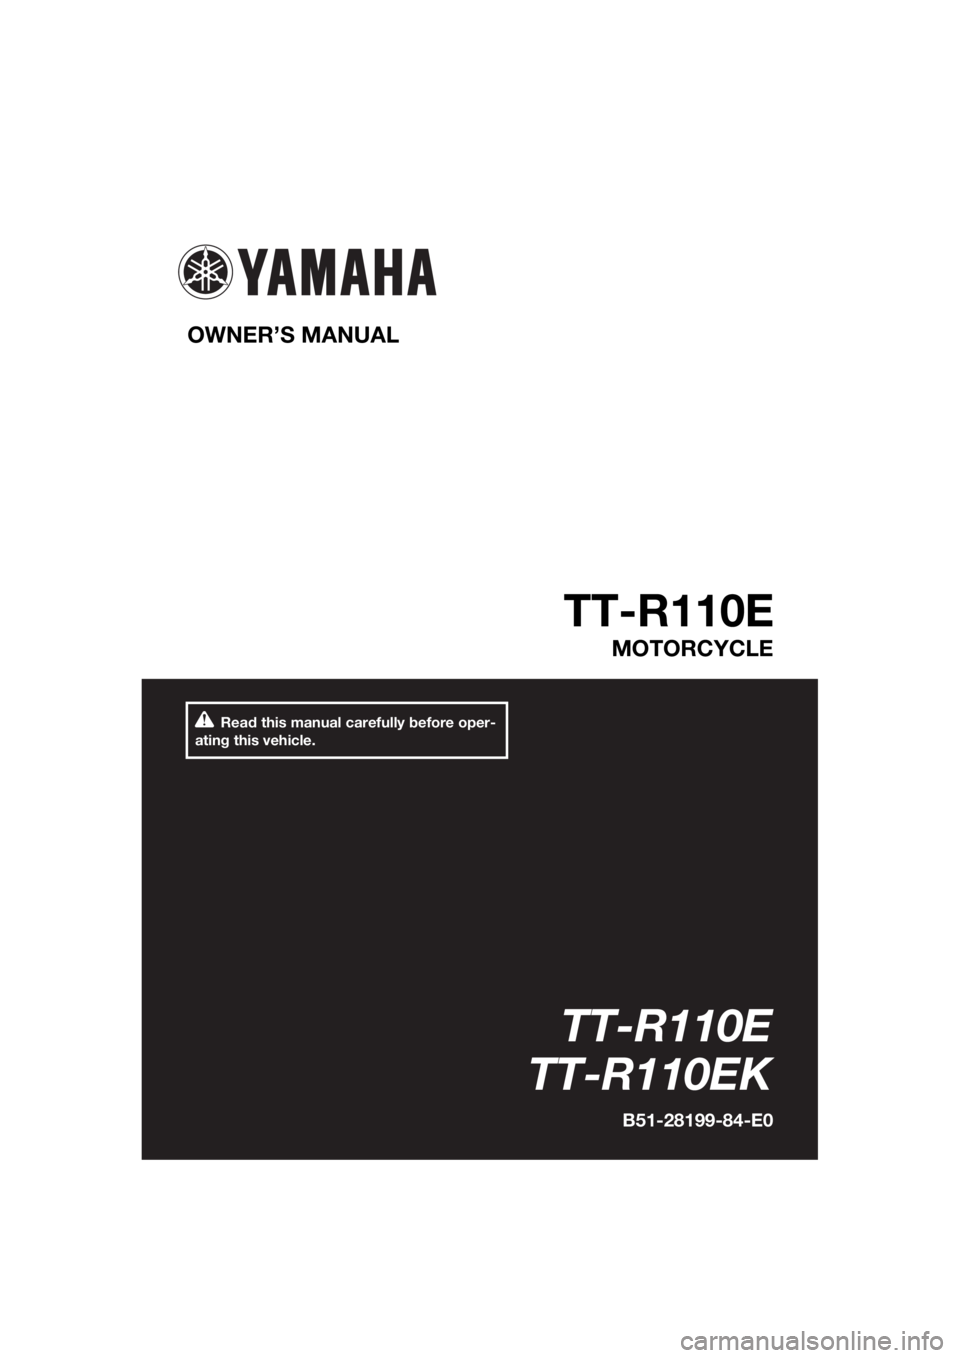 YAMAHA TT-R110E 2019  Owners Manual Read this manual carefully before oper-
ating this vehicle.
OWNER’S MANUAL 
TT-R110E
MOTORCYCLE
TT-R110E
TT-R110EK
B51-28199-84-E0
UB5184E0.book  Page 1  Thursday, June 7, 2018  2:10 PM 